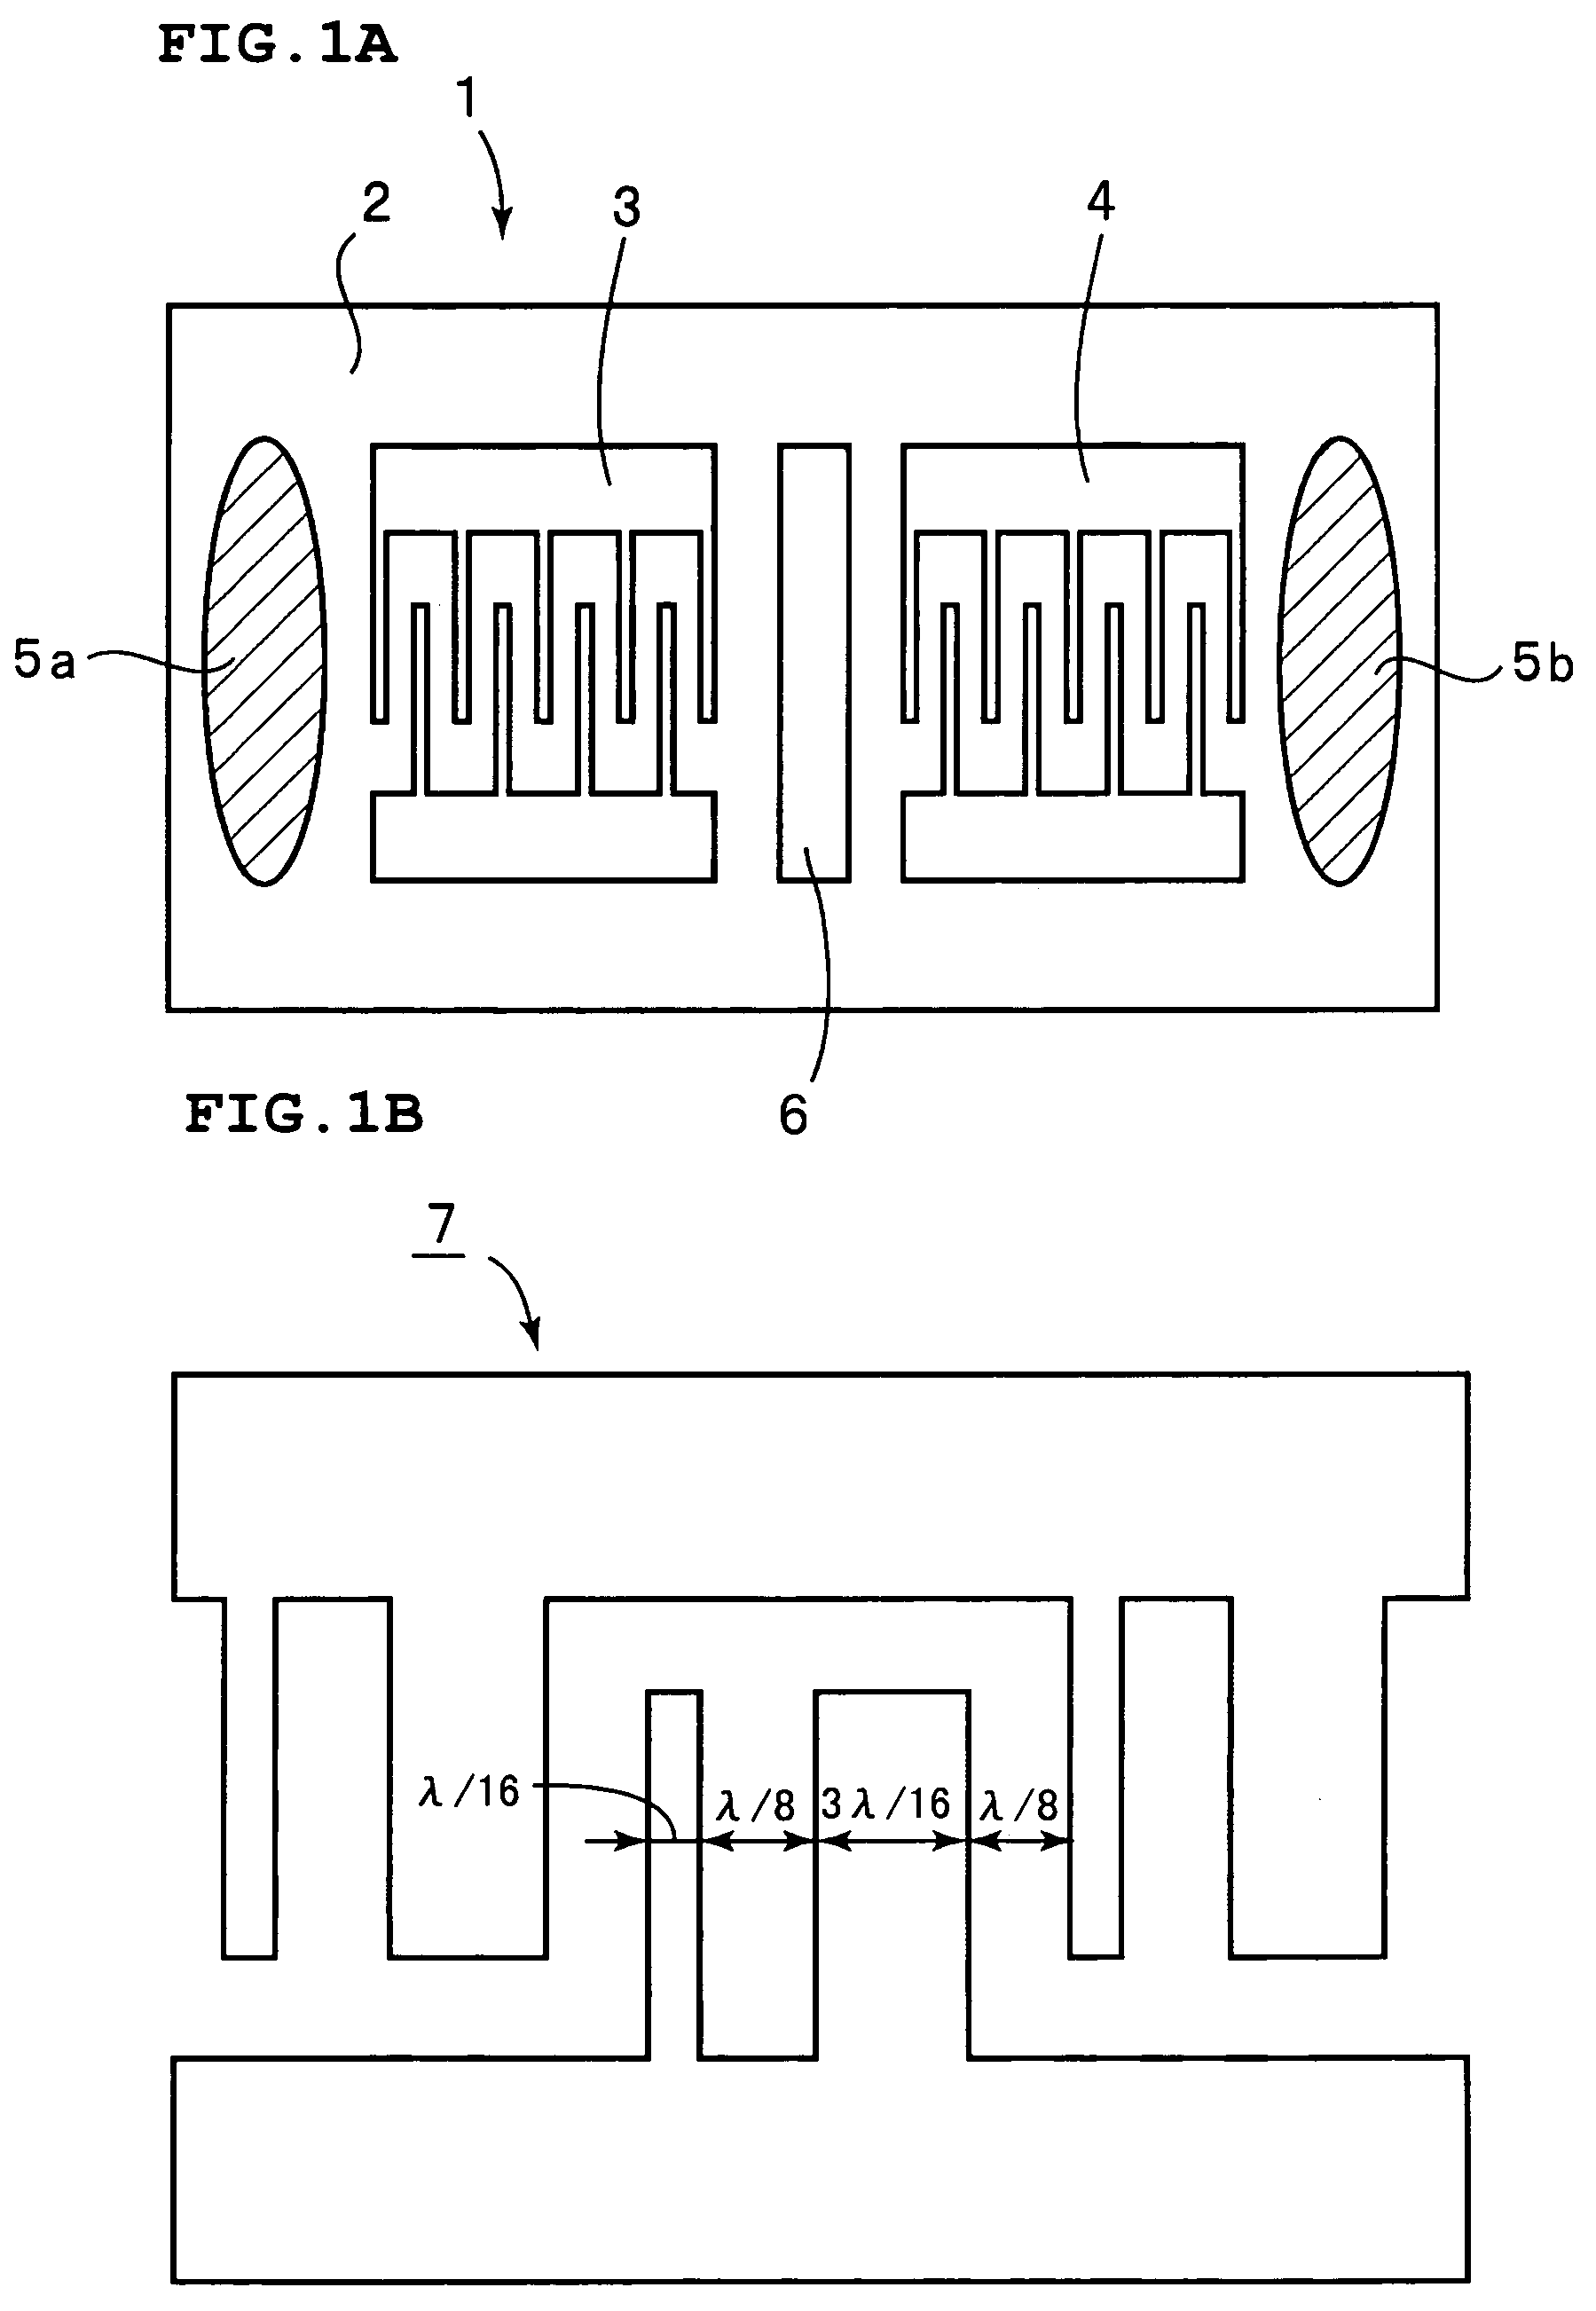 Surface acoustic wave filter